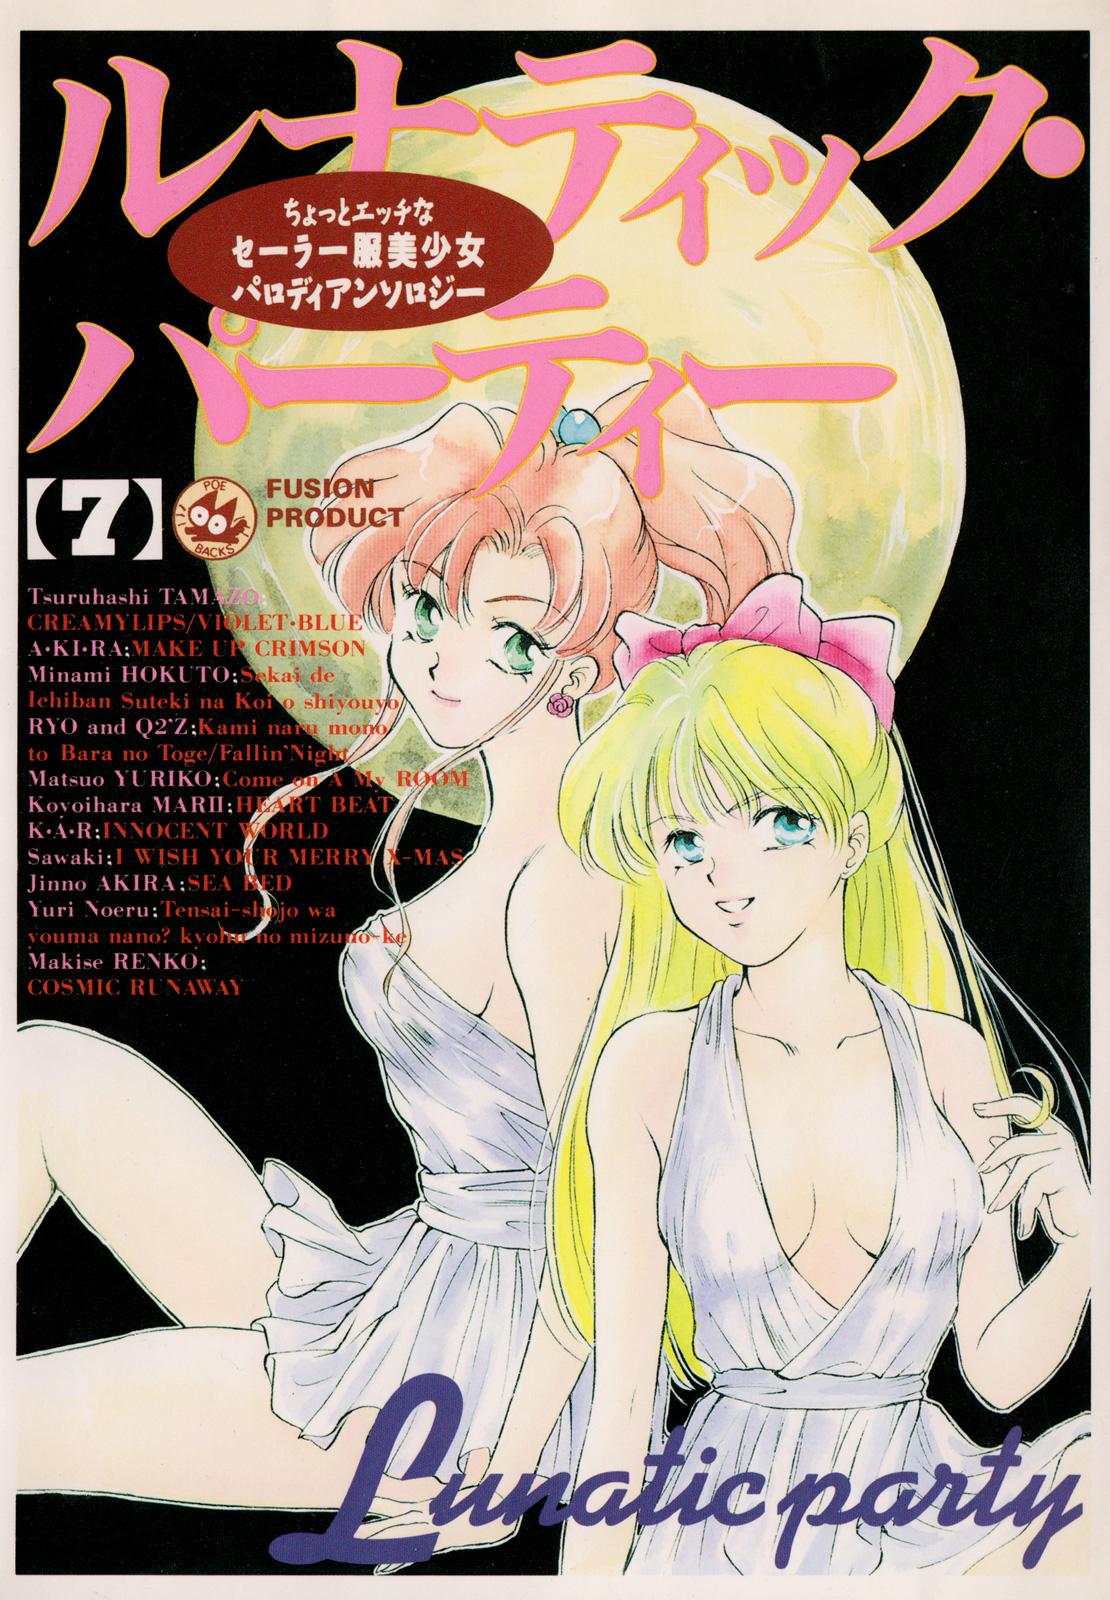 Inked Lunatic Party 7 - Sailor moon Toilet - Picture 1